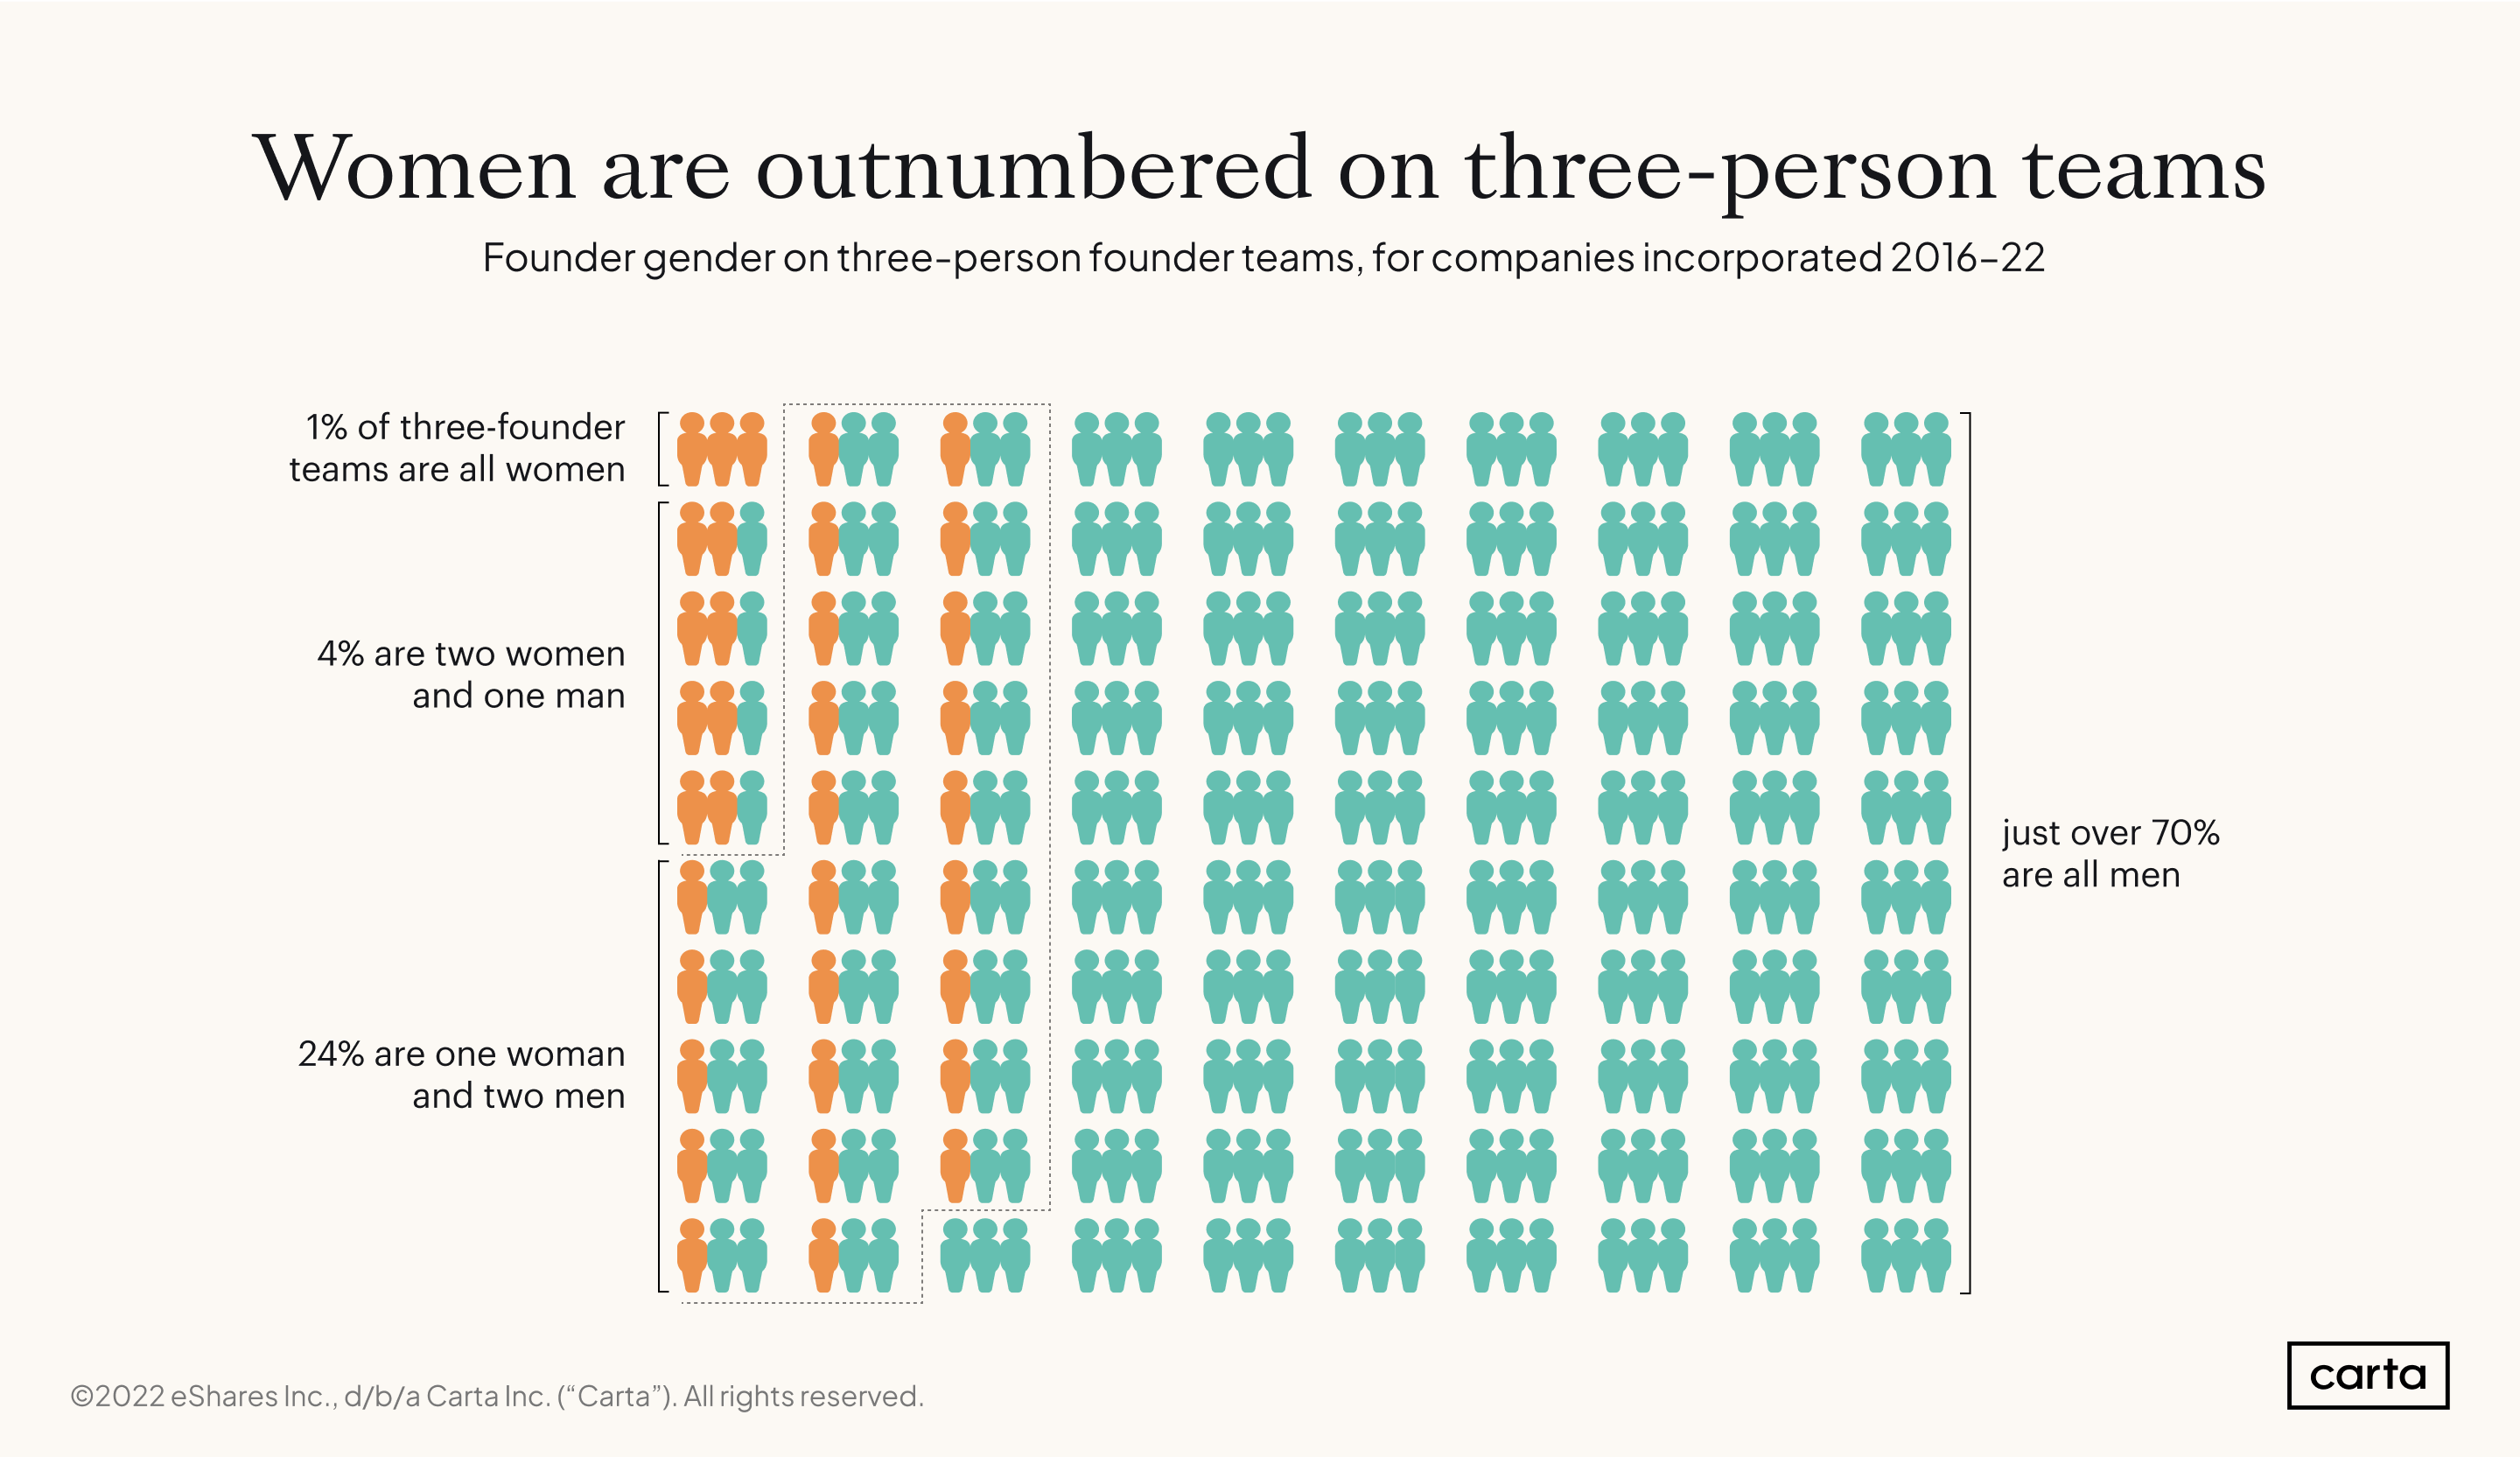 CES Gender of co-founder teams of three